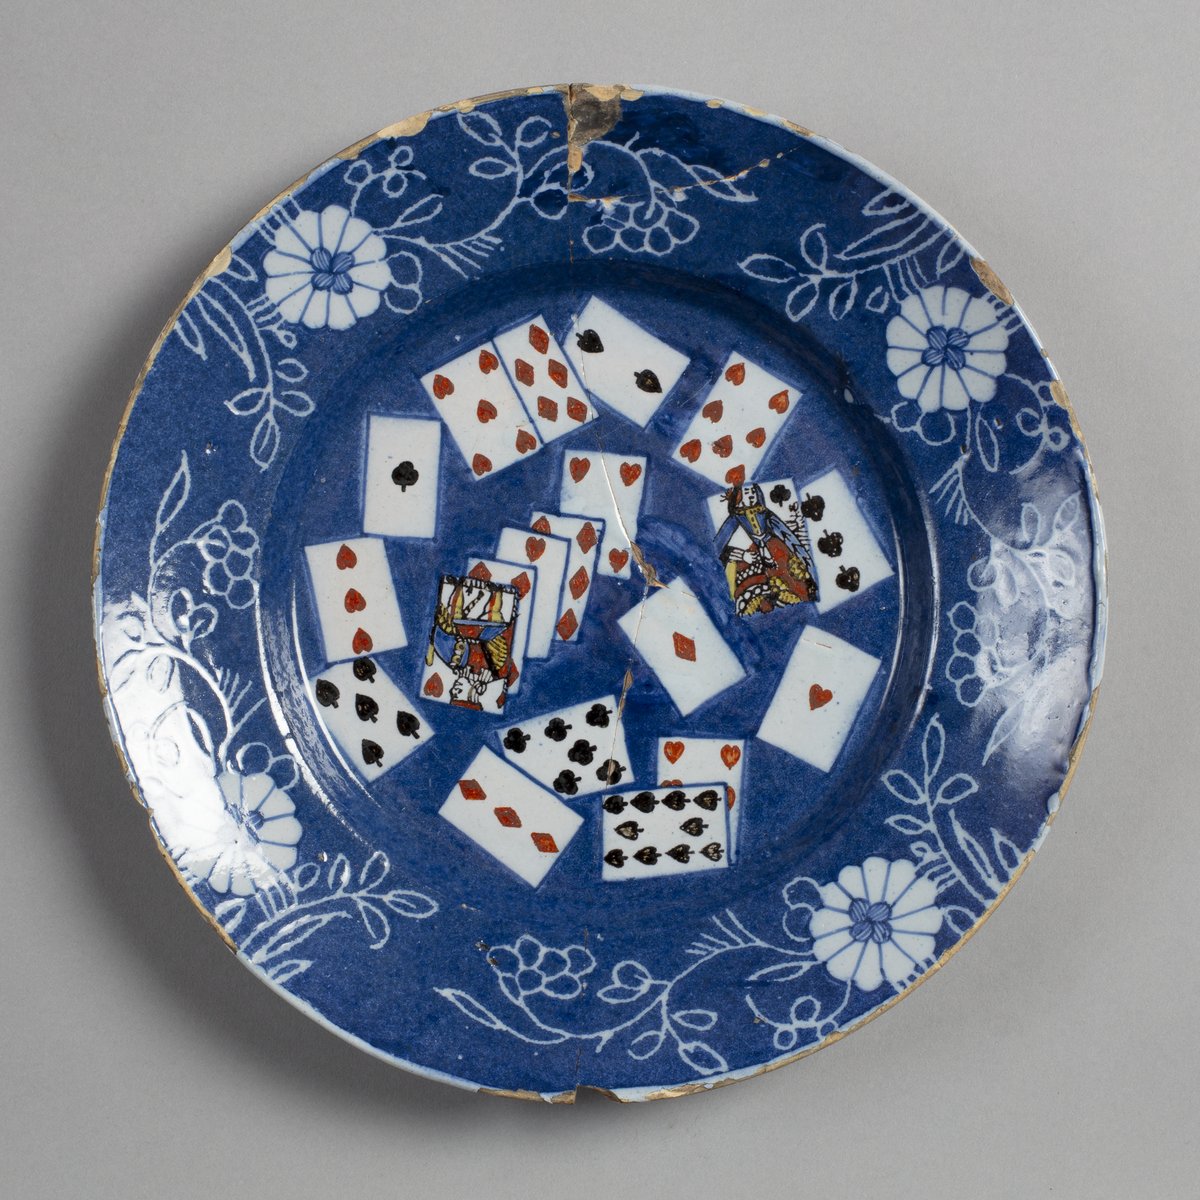 @bristolmuseum Good luck with these activities! Here an early English #delftware charger with #tulip, 1640, 38cm. C.EvD. #rijksmuseum #tulips #pottery #potter #Londondelft #goldenage #maiolica #faience #tinglaze #antiquedelft #ceramics #antiqueceramics.